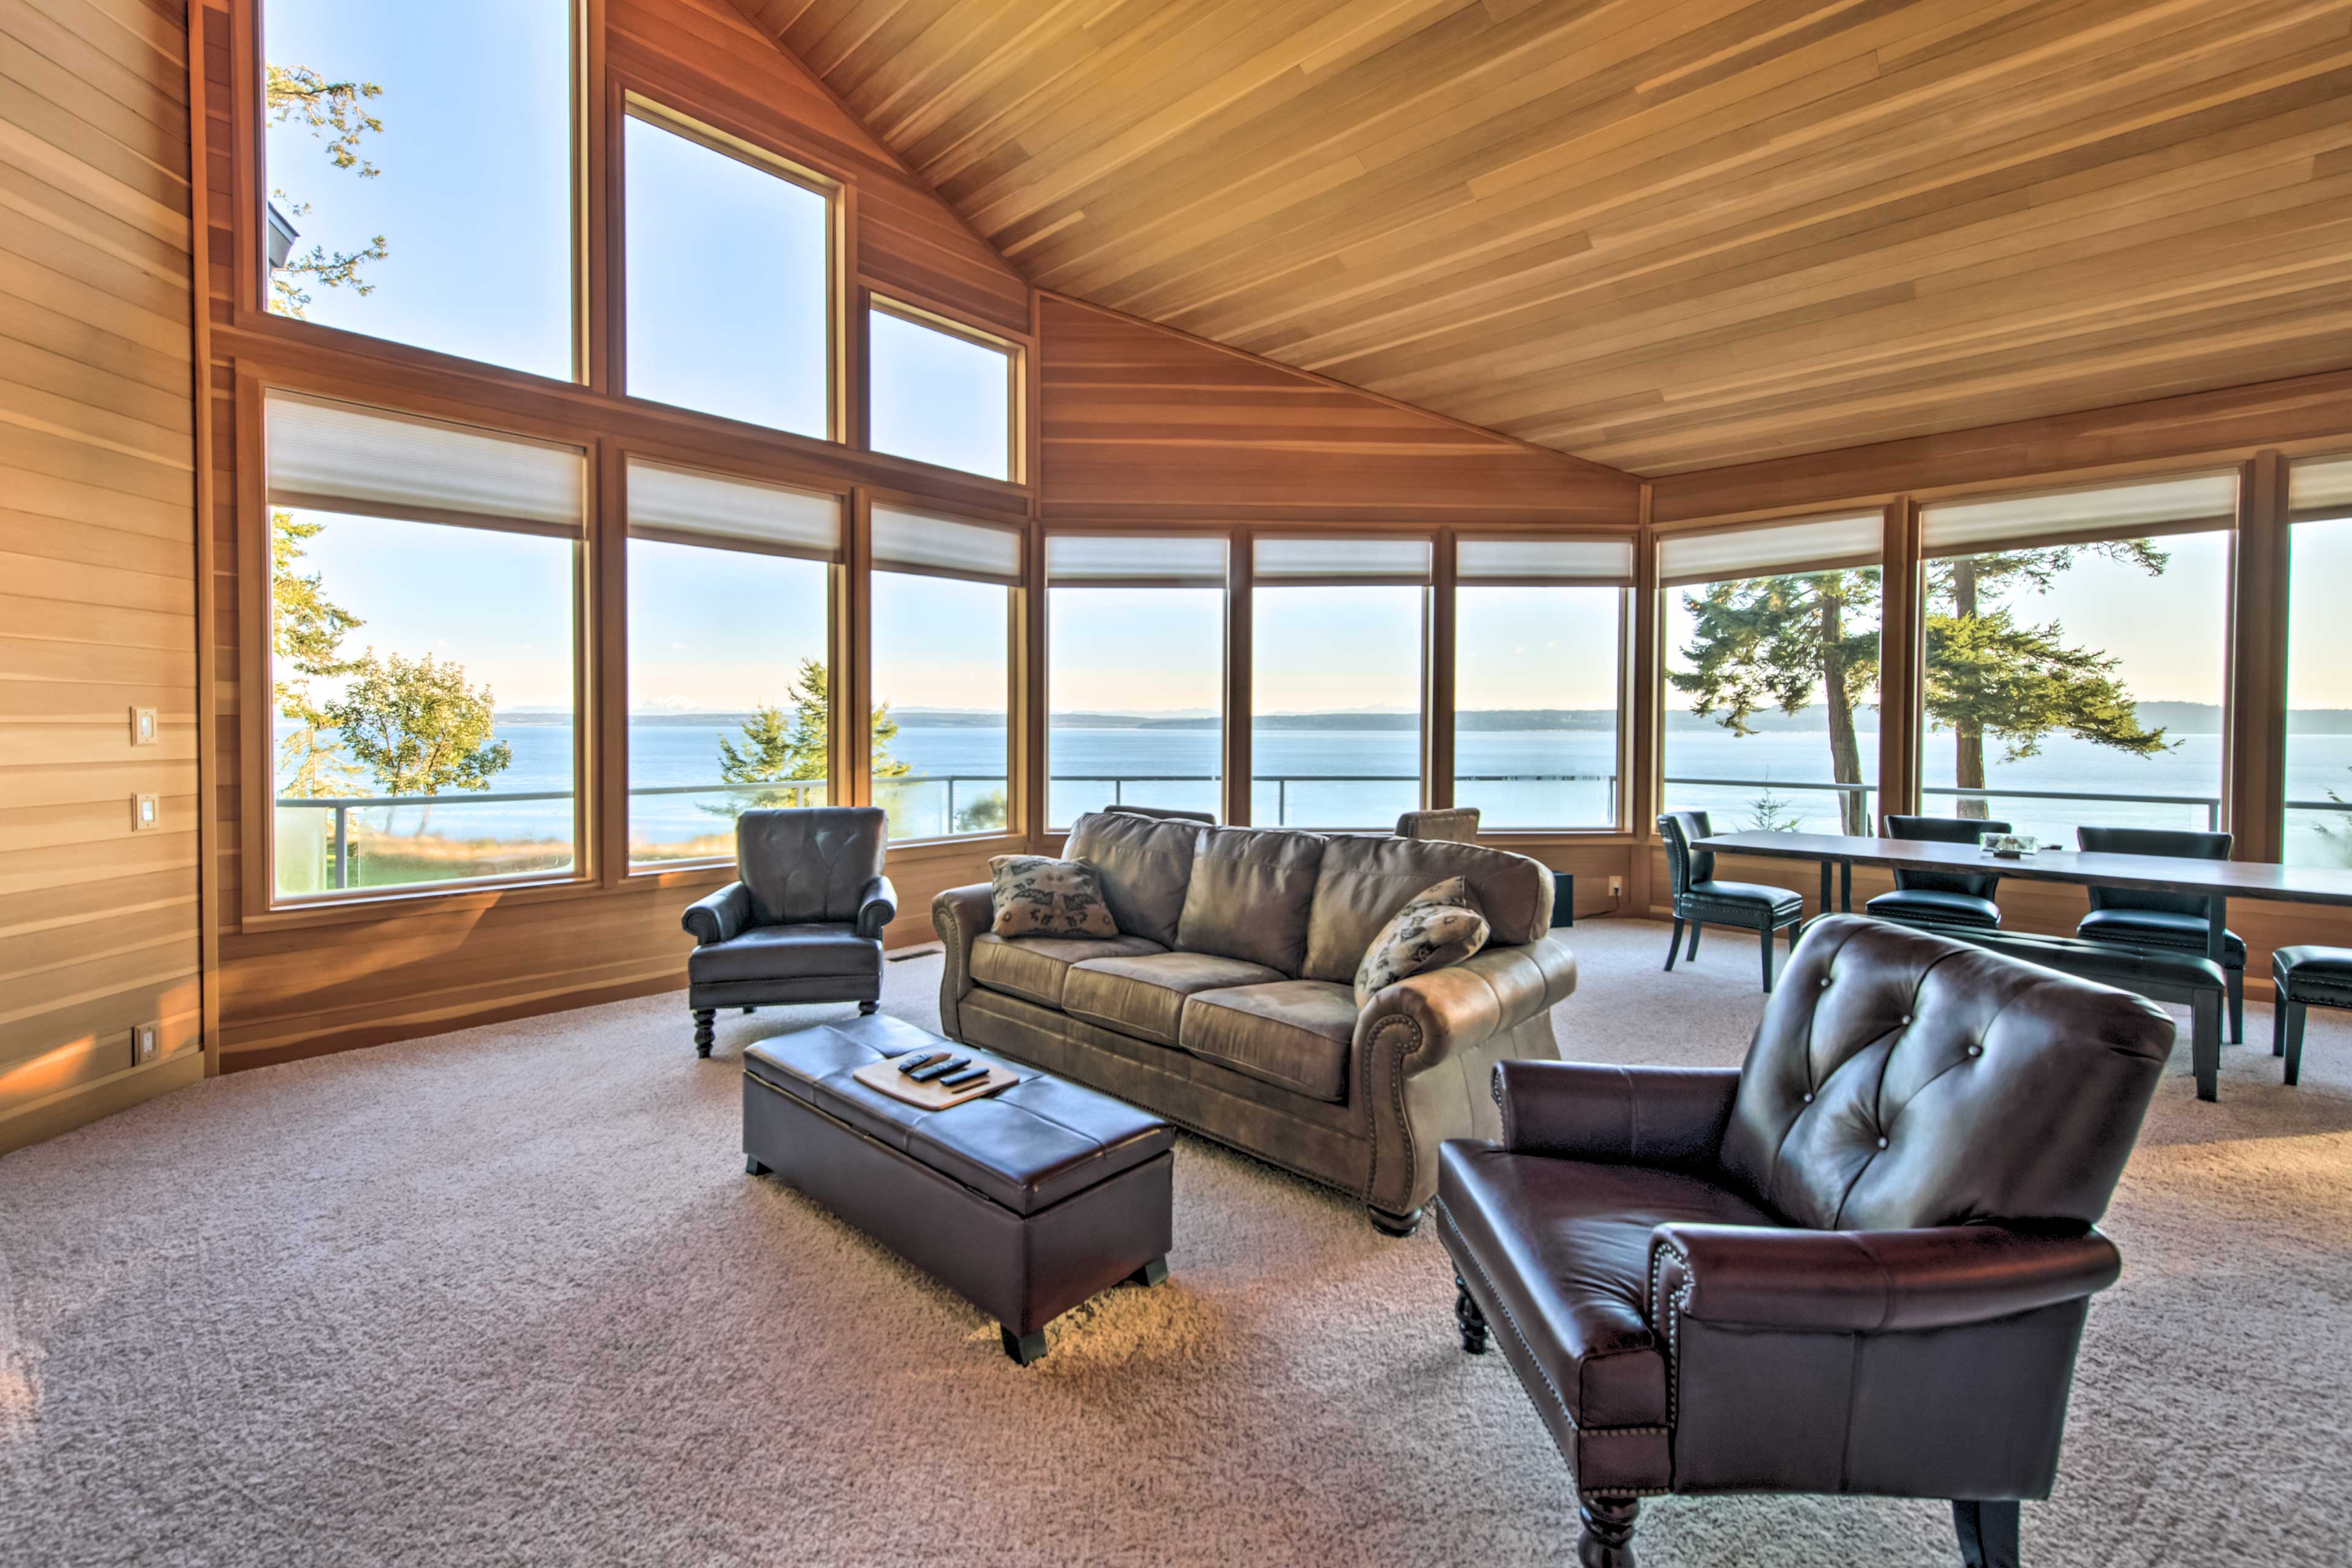 Property Image 1 - Marrowstone Island Home: 20 Mins to Port Townsend!